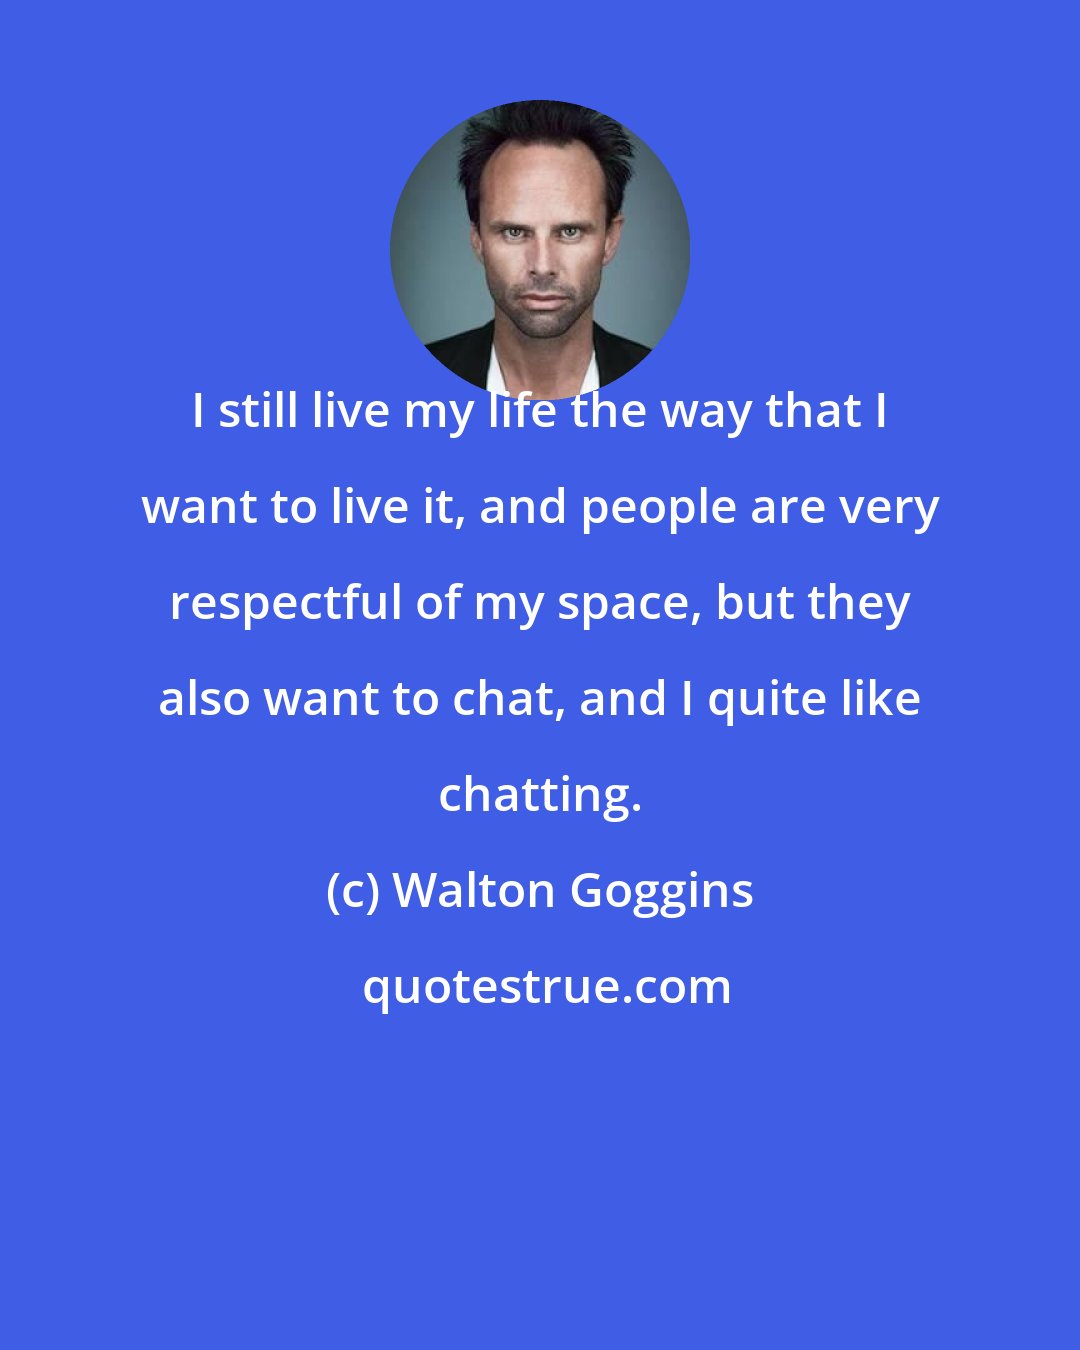 Walton Goggins: I still live my life the way that I want to live it, and people are very respectful of my space, but they also want to chat, and I quite like chatting.